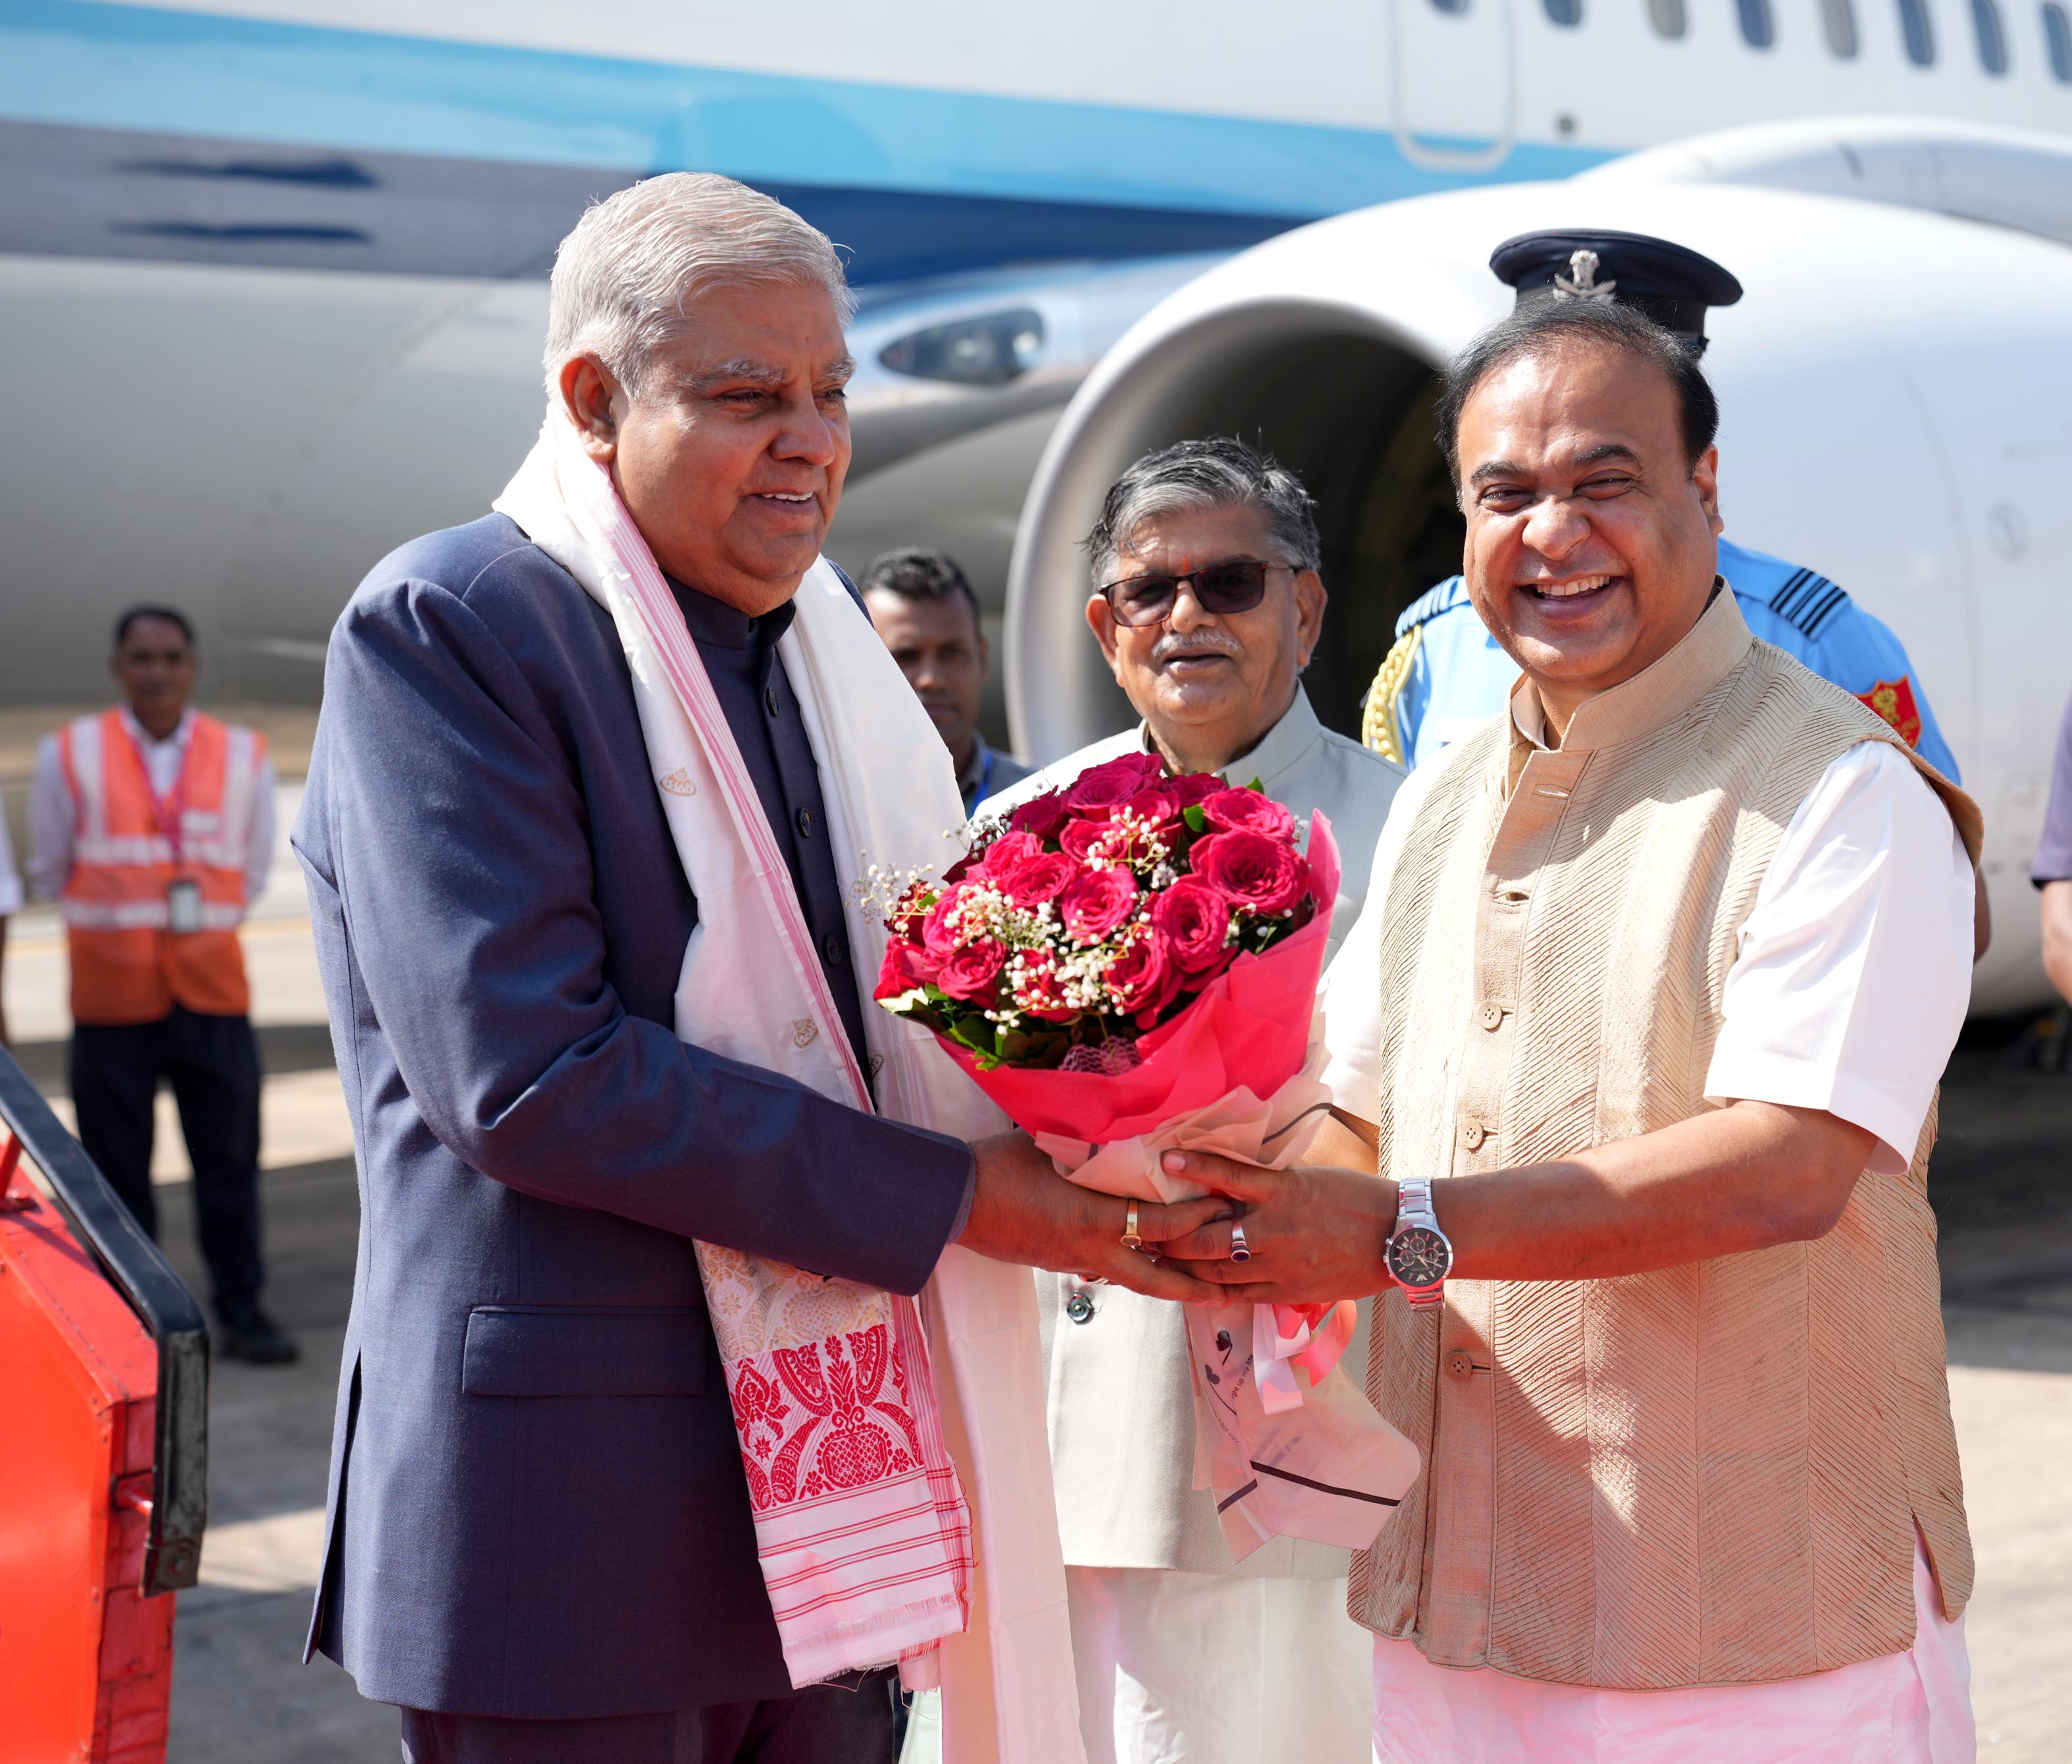 The Vice-President, Shri Jagdeep Dhankhar being welcomed by the Governor of Assam, Shri Gulab Chand Kataria, Chief Minister of Assam, Dr. Himanta Biswa Sarma and other dignitaries on his arrival in Guwahati, Assam on October 30, 2023.